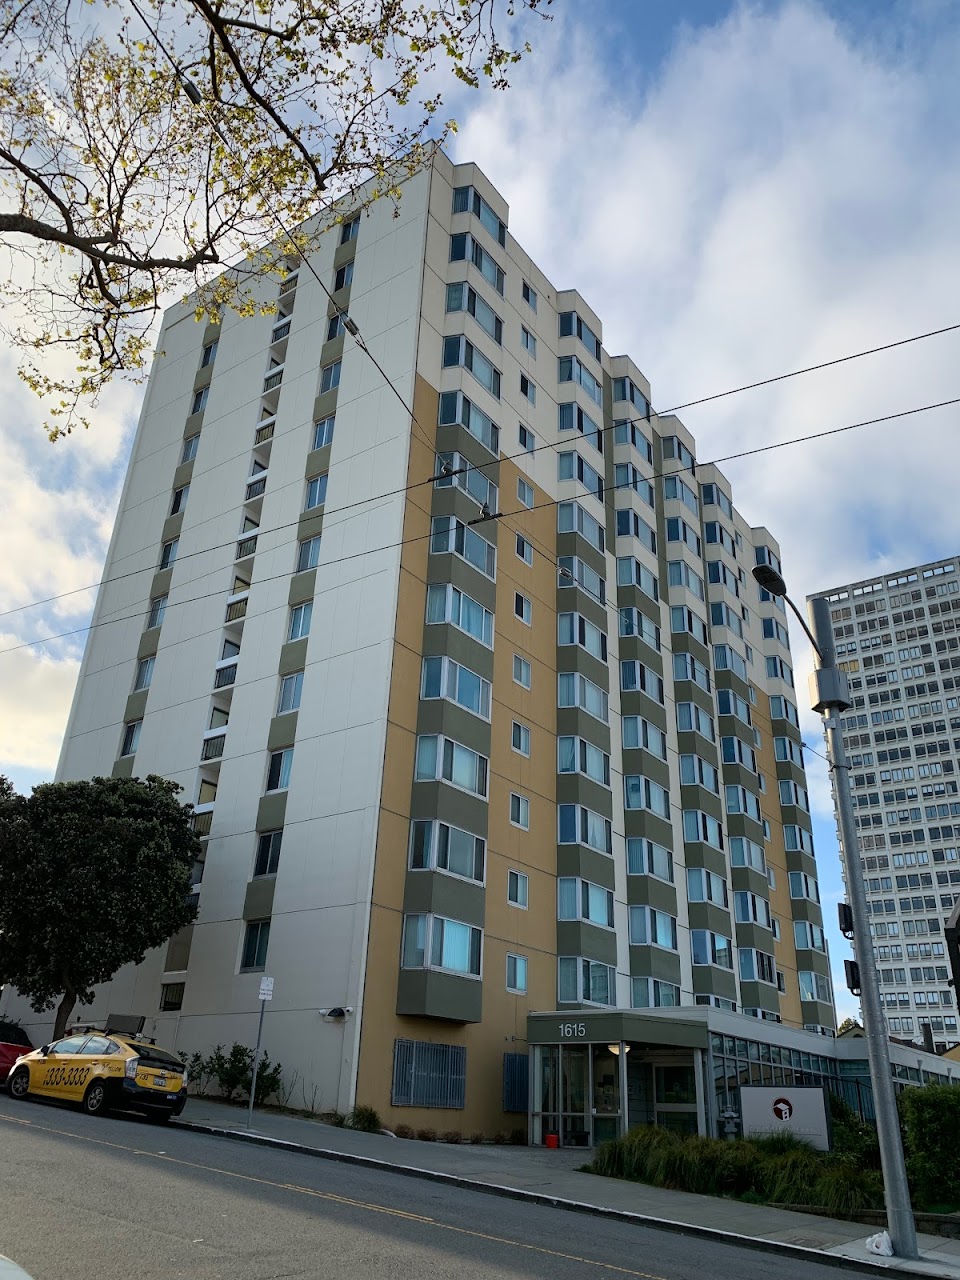 Photo of NIHONMACHI TERRACE. Affordable housing located at 1615 SUTTER ST SAN FRANCISCO, CA 94109